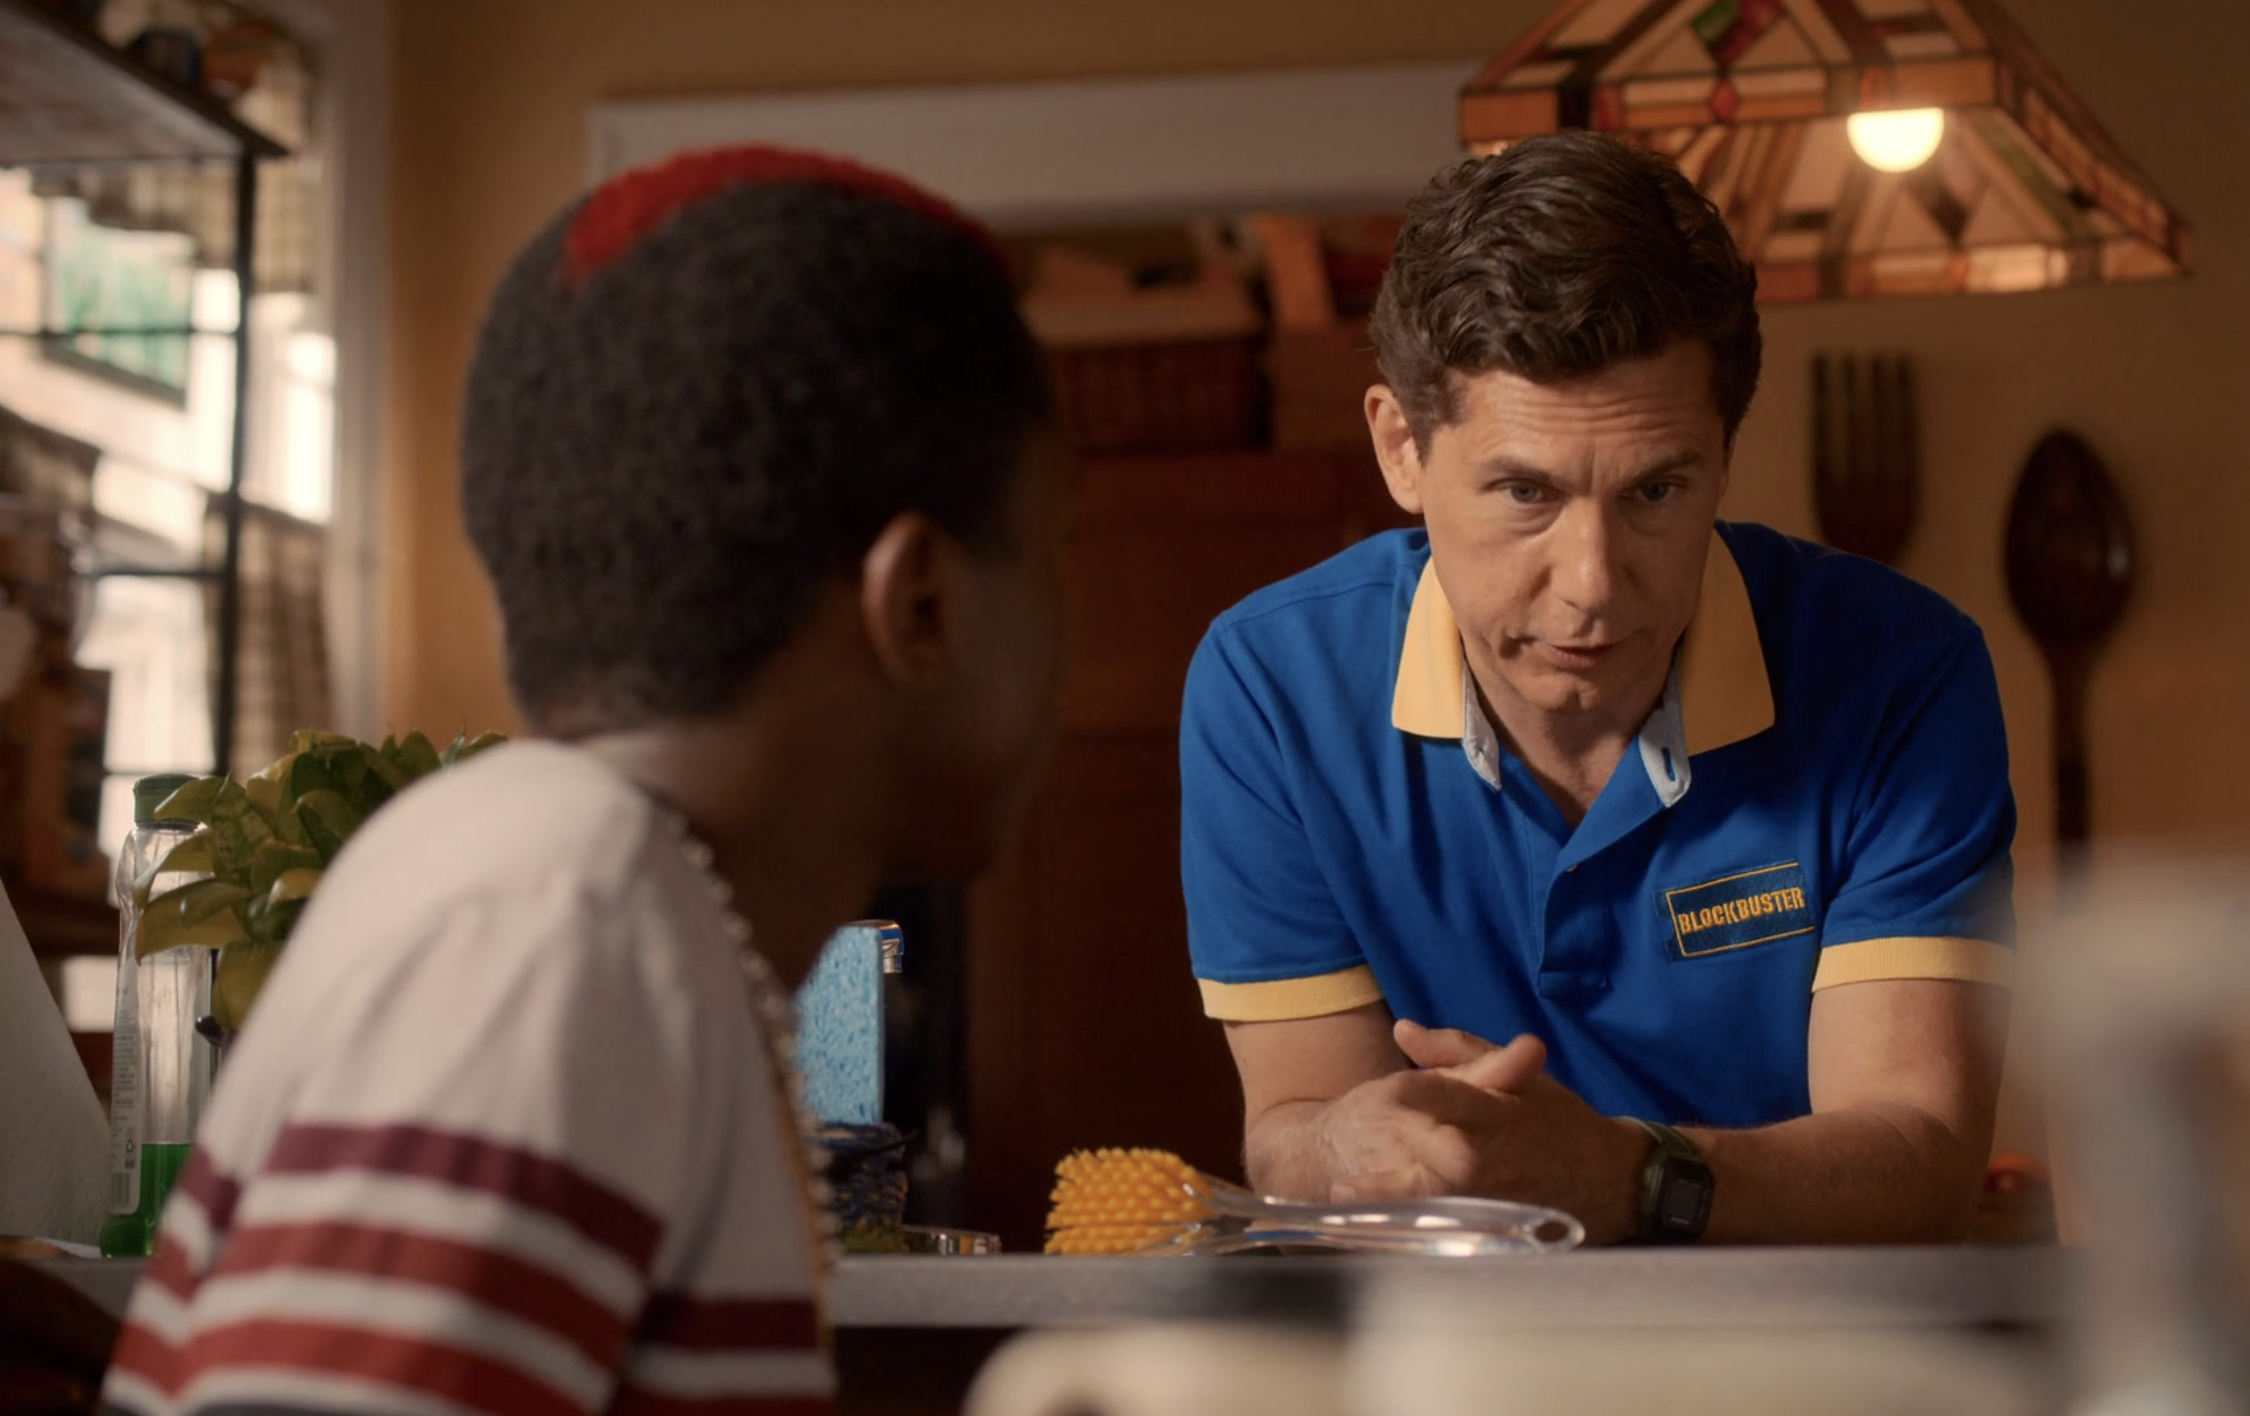 Man in a Blockbuster uniform leading on a table